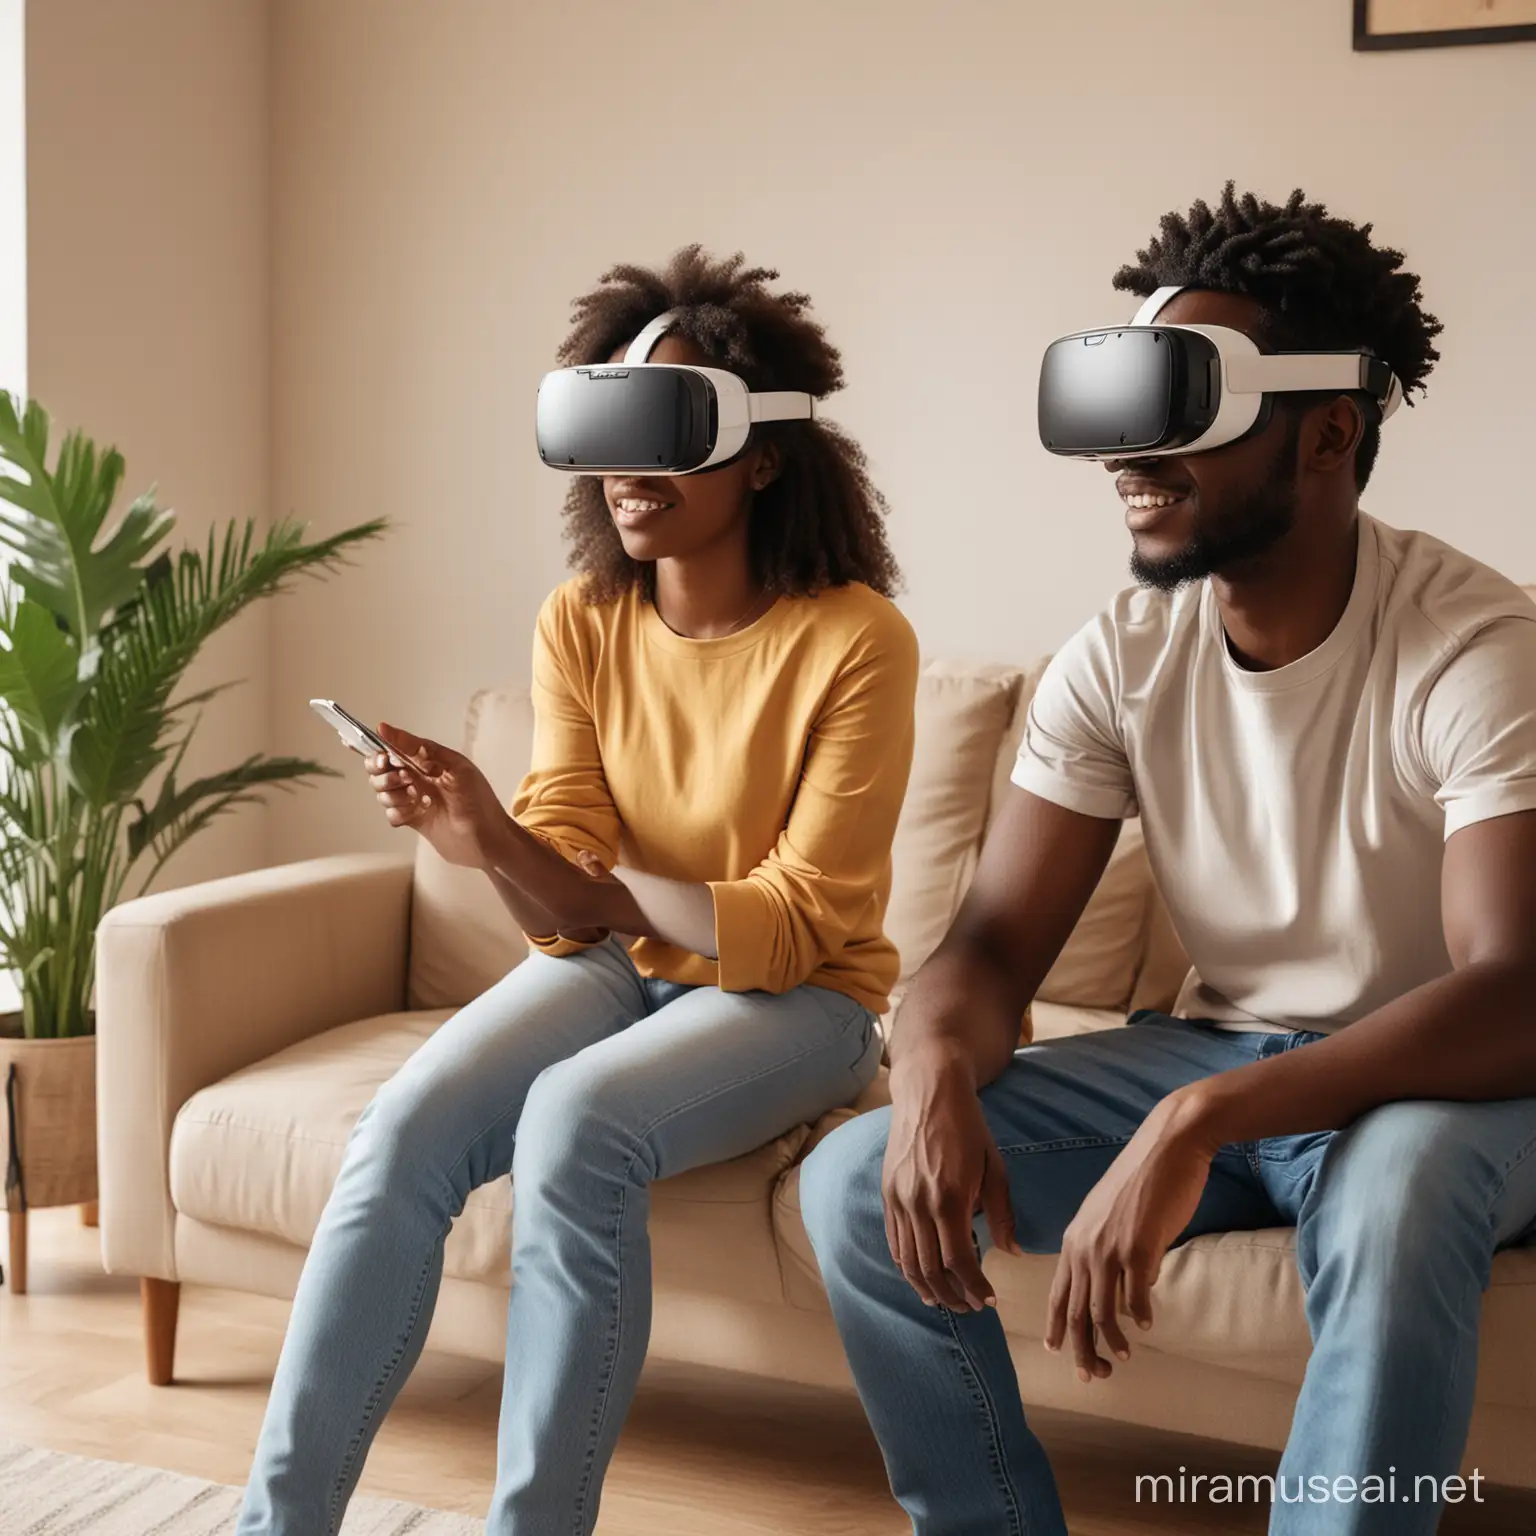 African Family Enjoying Virtual Reality Experience at Home